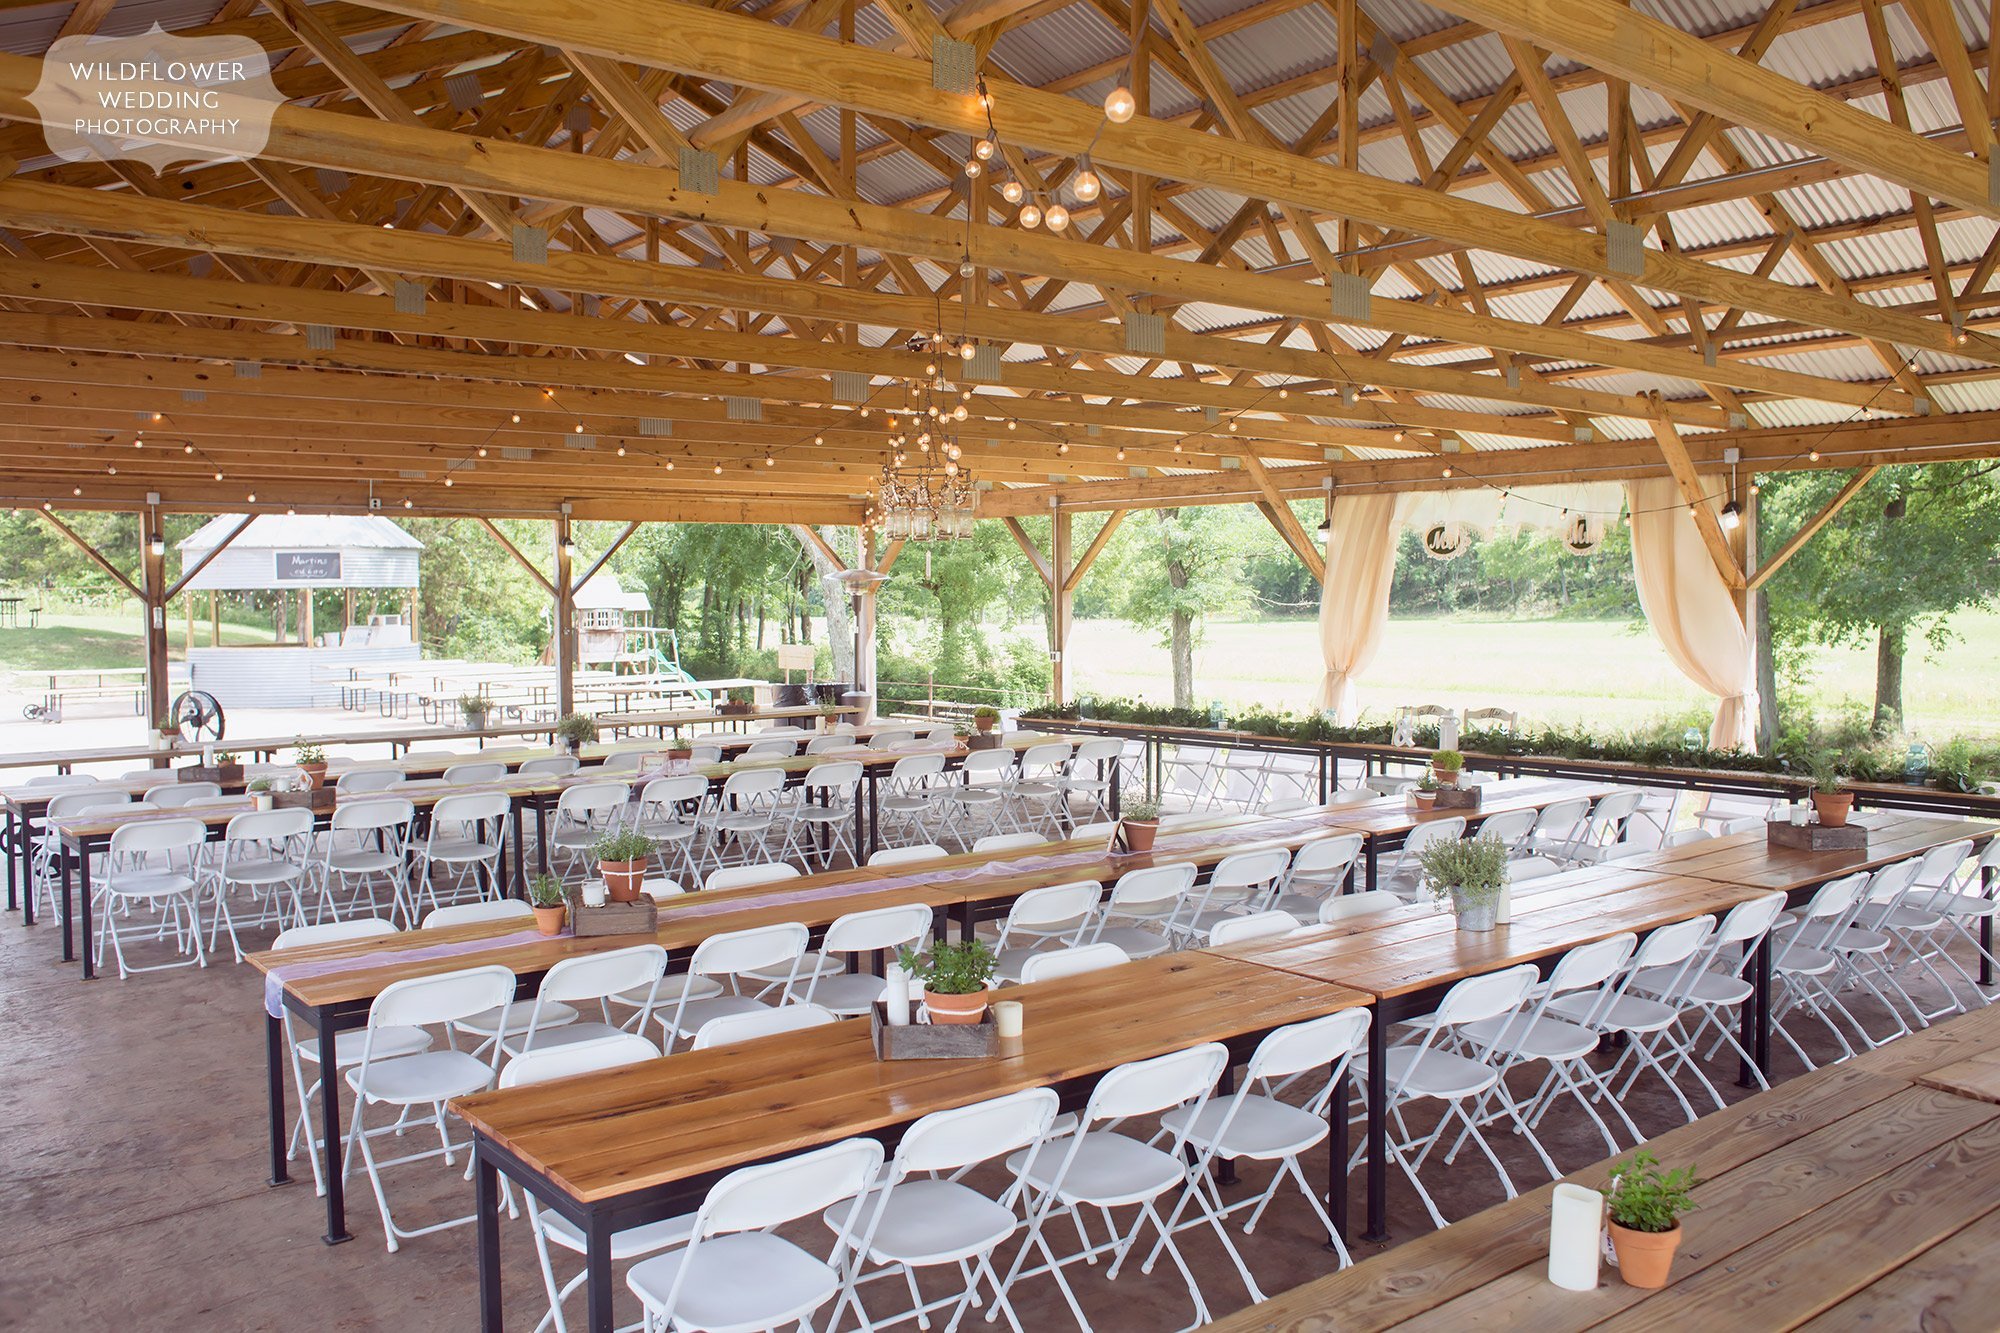 View of the dinner tables set up in the covered pavilion at this barn wedding venue at Kempker's Back 40 in southern MO.